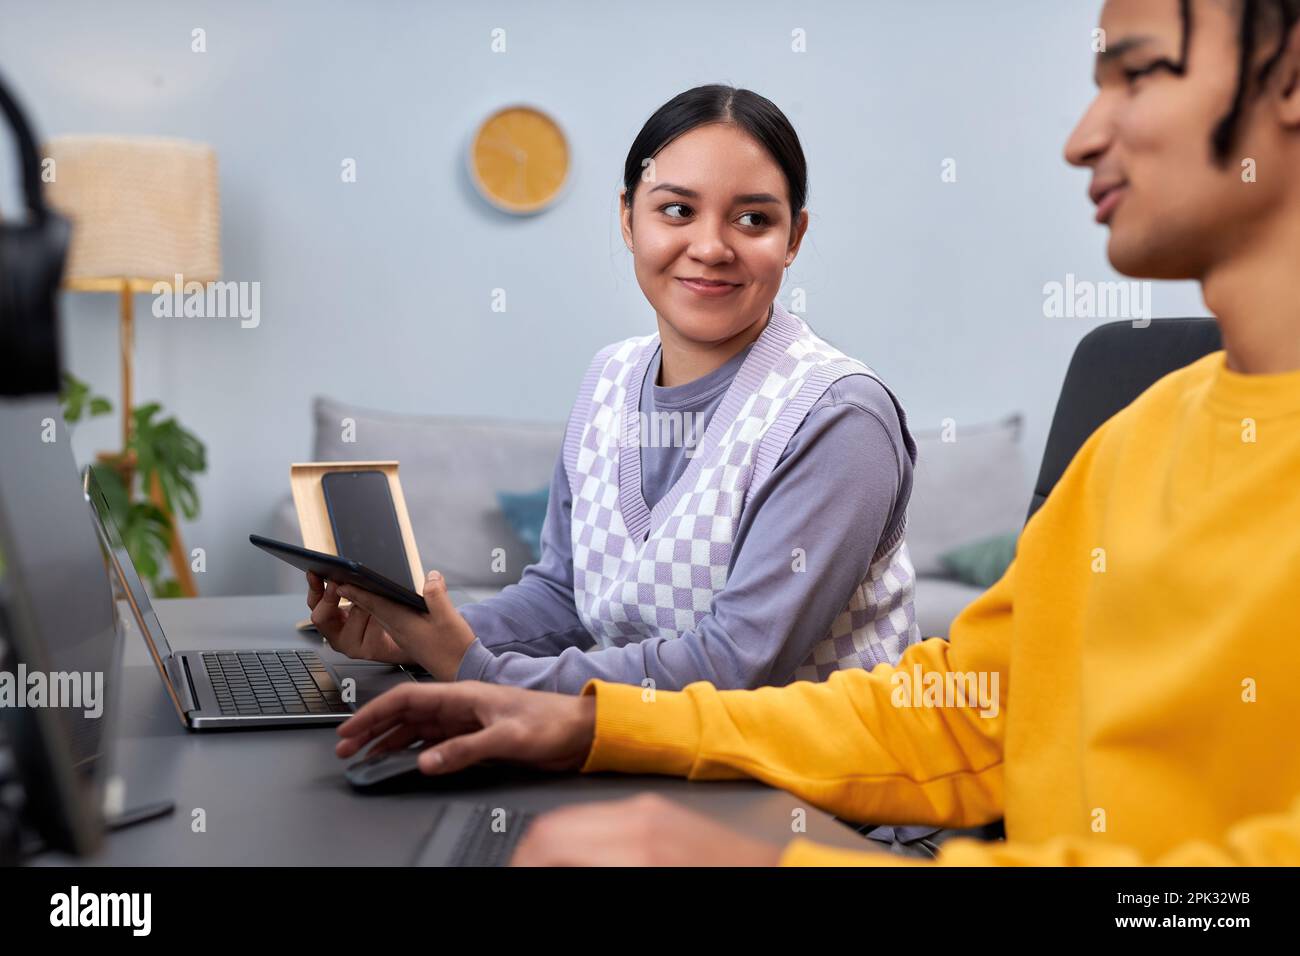 Portrait of young woman smiling at male colleague while working on software development project together Stock Photo